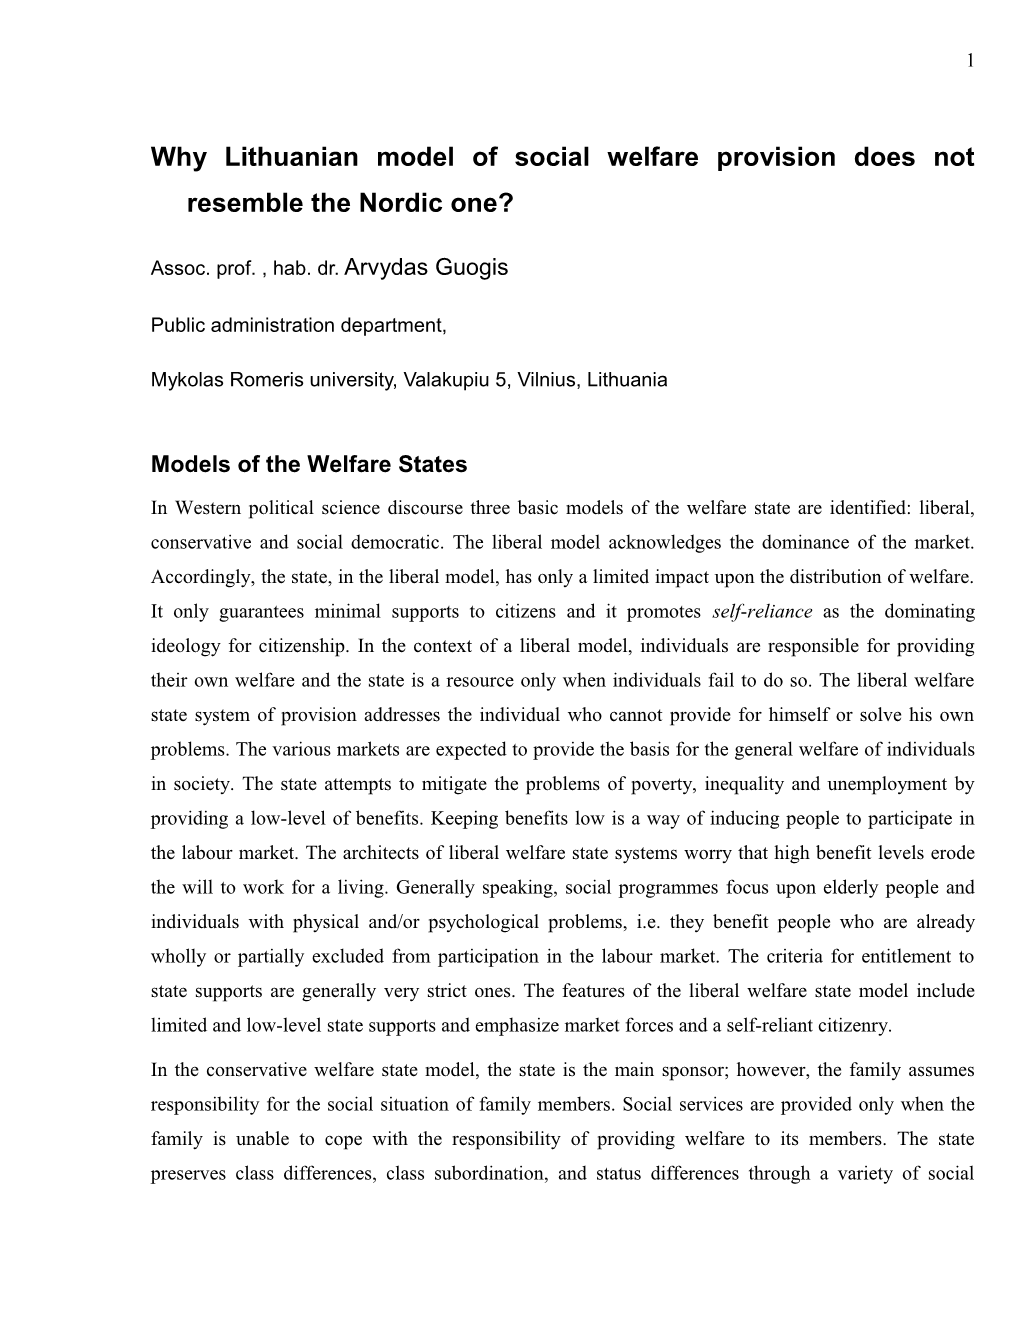 Why Lithuanian Model of Social Welfareprovision Does Not Resemble the Nordic One?